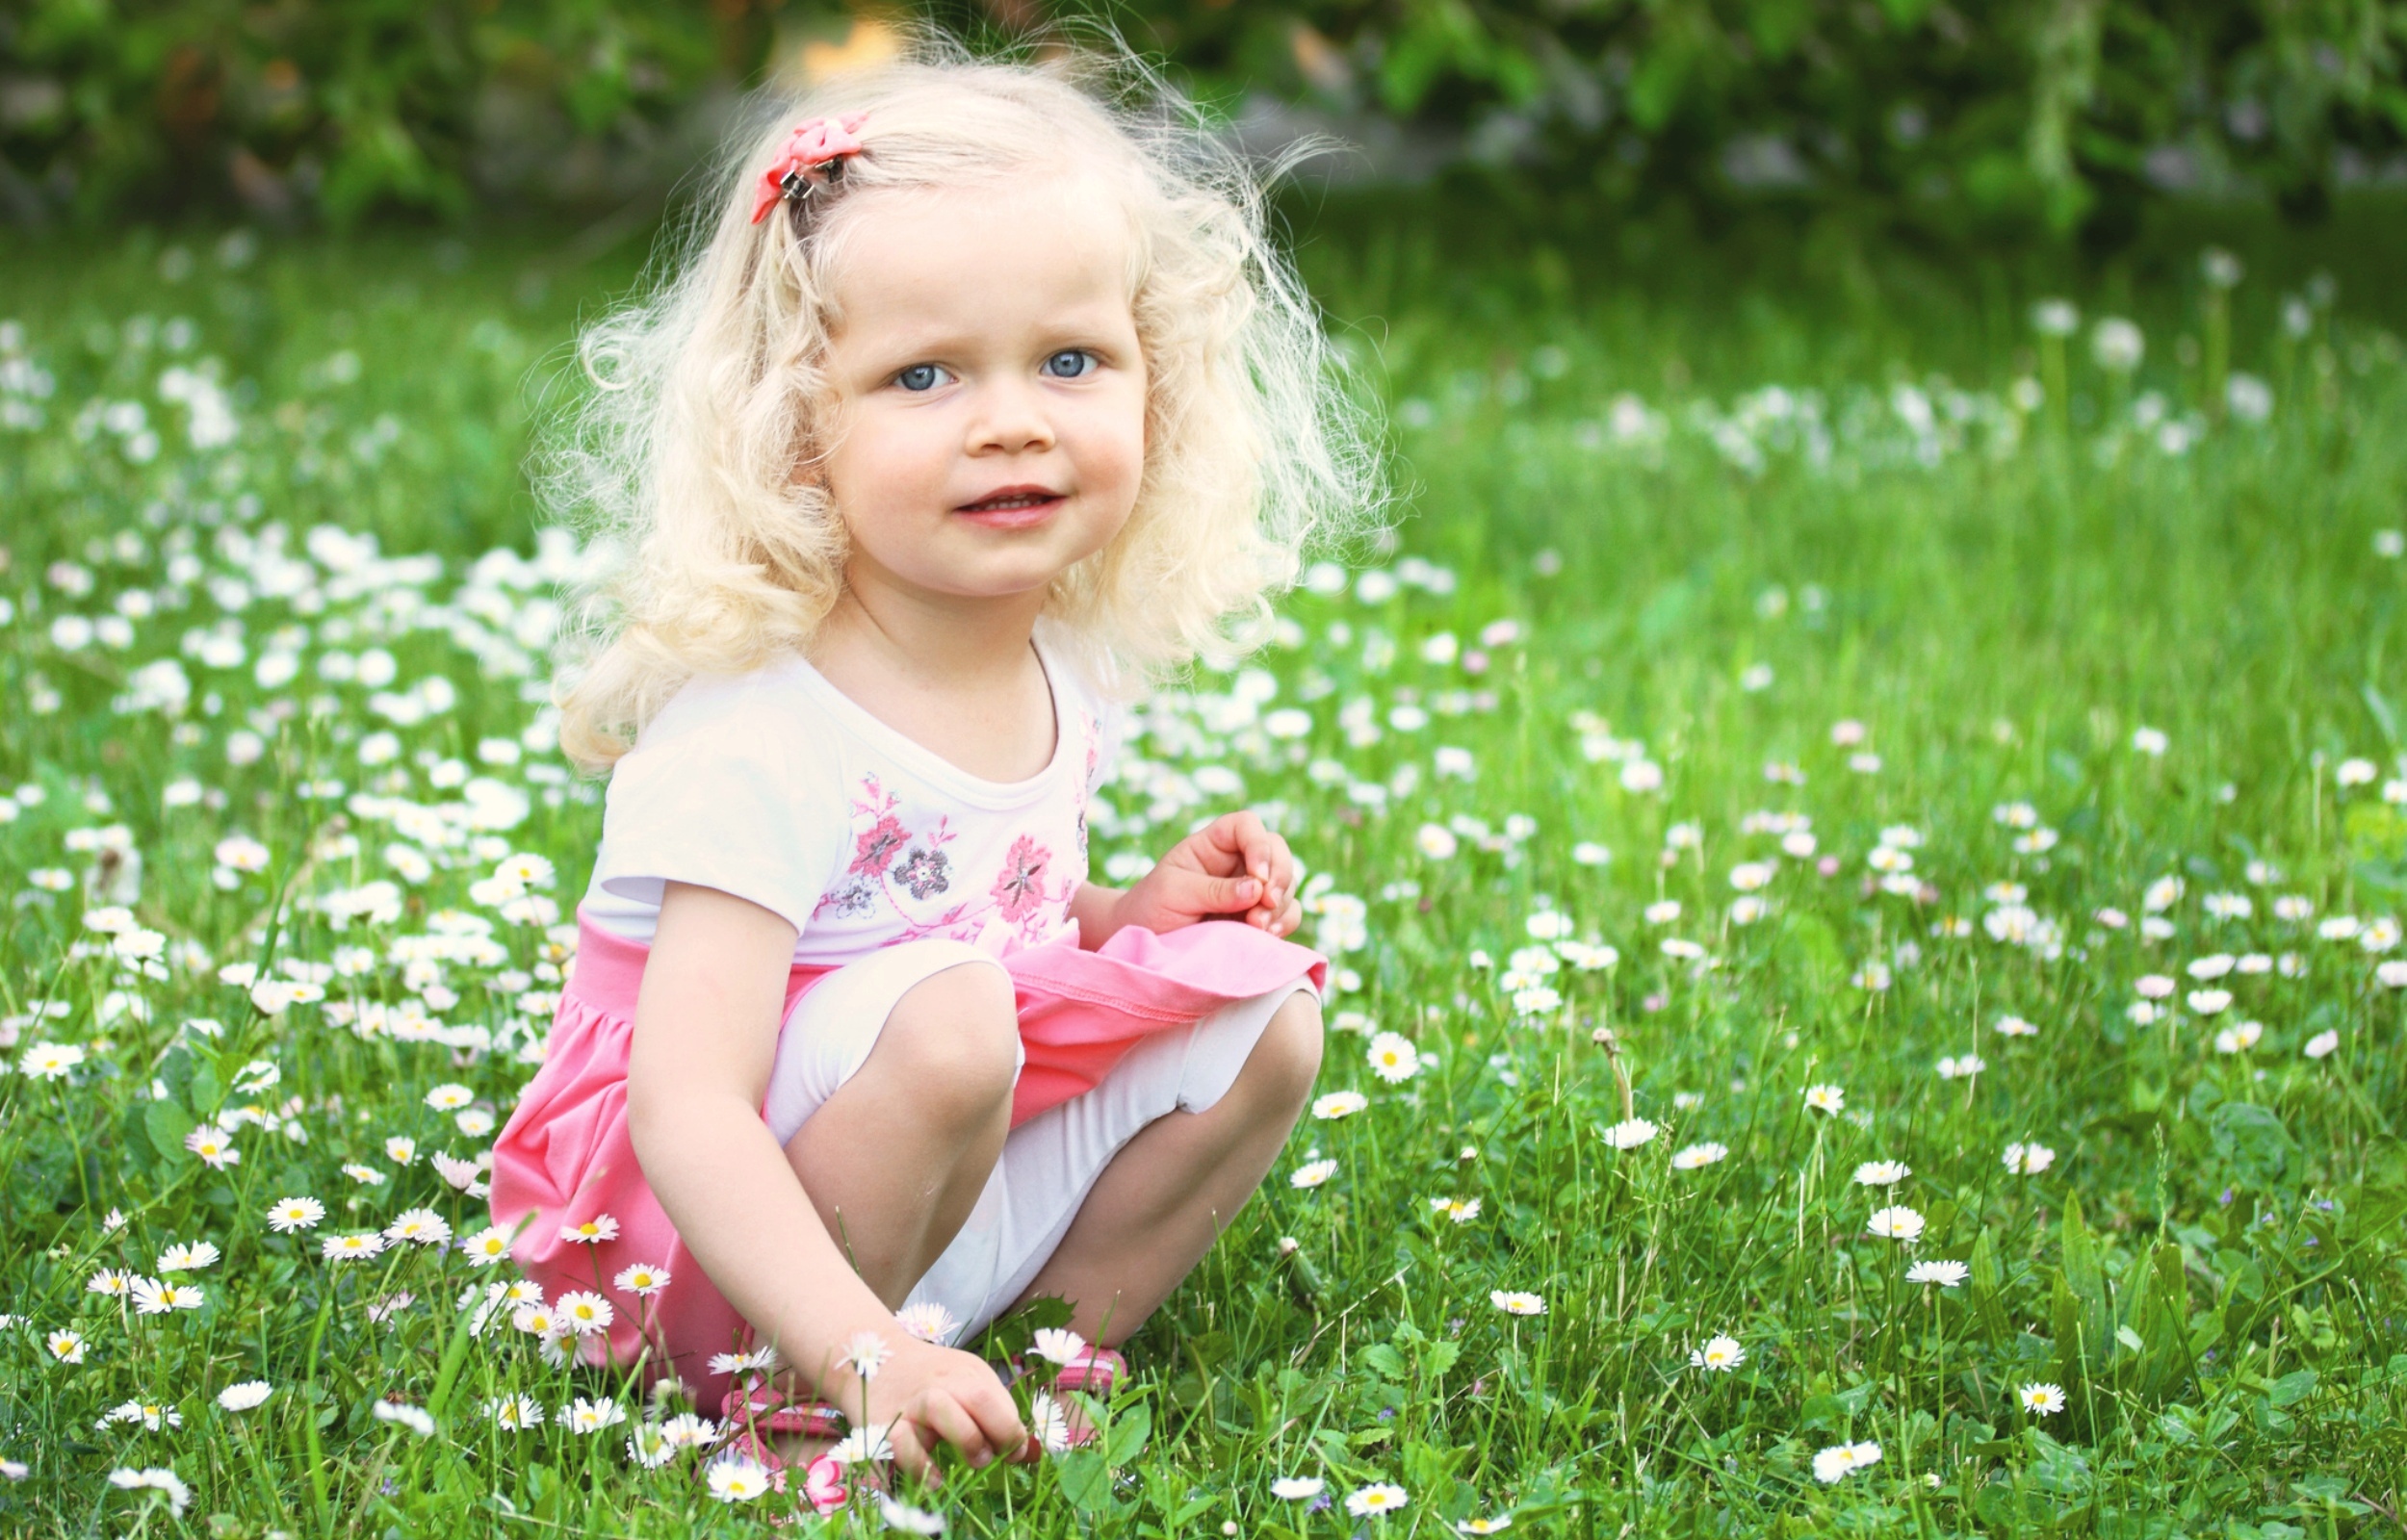 Cute Little Girl stock image. Image of kids, cheerful 